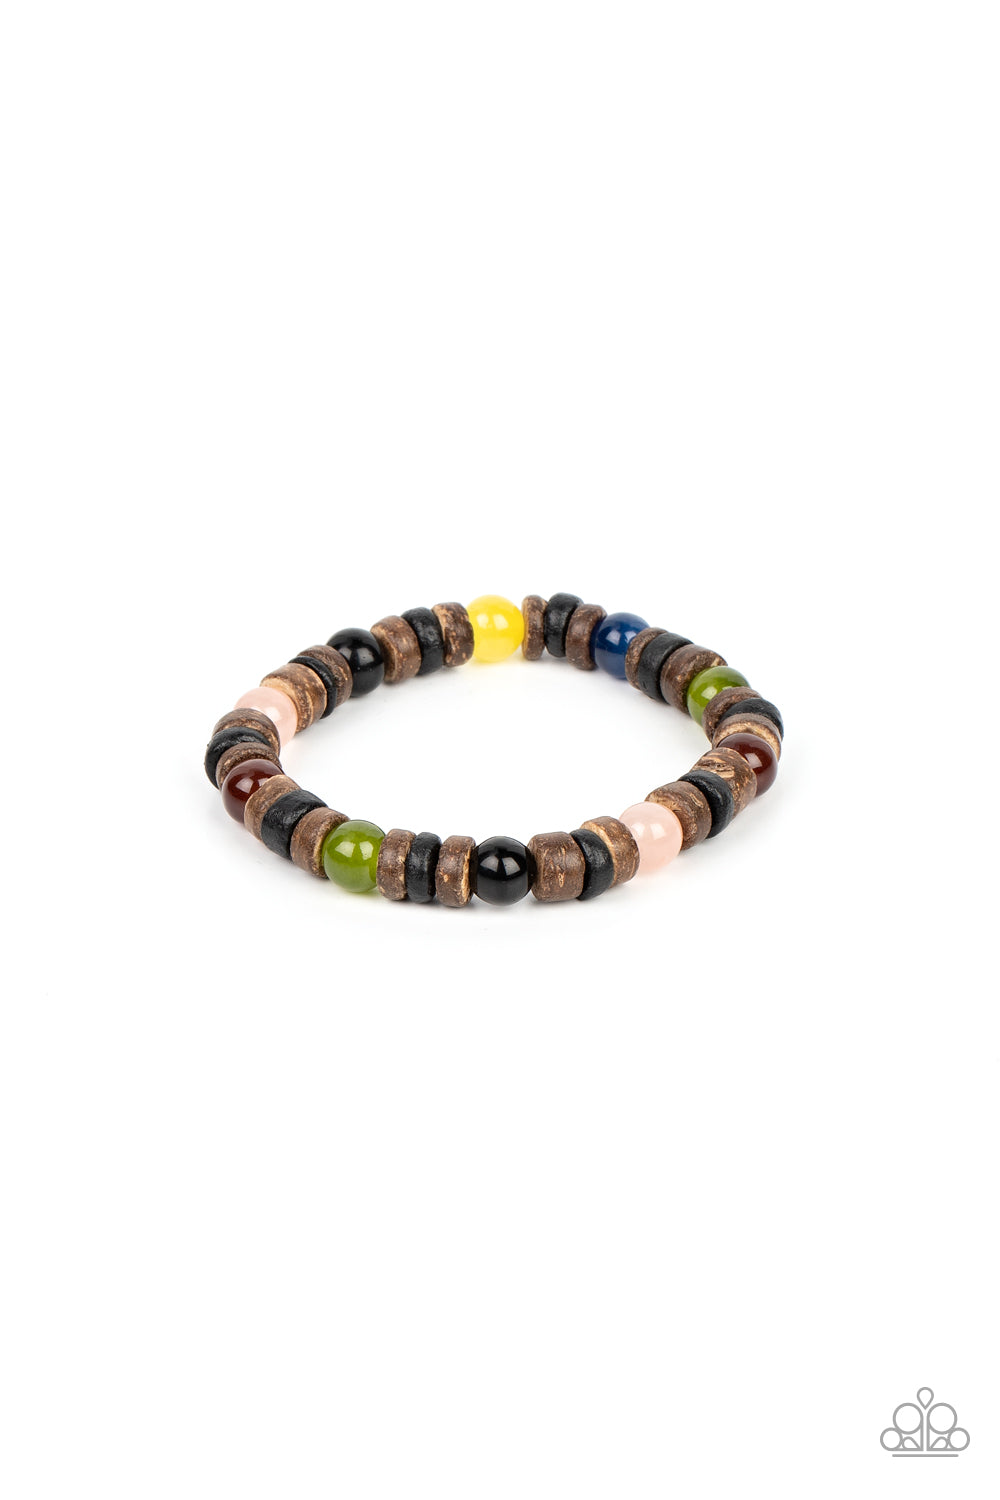 Durango Drifter Multi Bracelet - Paparazzi Accessories  Glassy multicolored stone beads join trios of black and brown wooden discs along stretchy bands around the wrist, resulting in an earthy pop of color.  Sold as one individual bracelet.